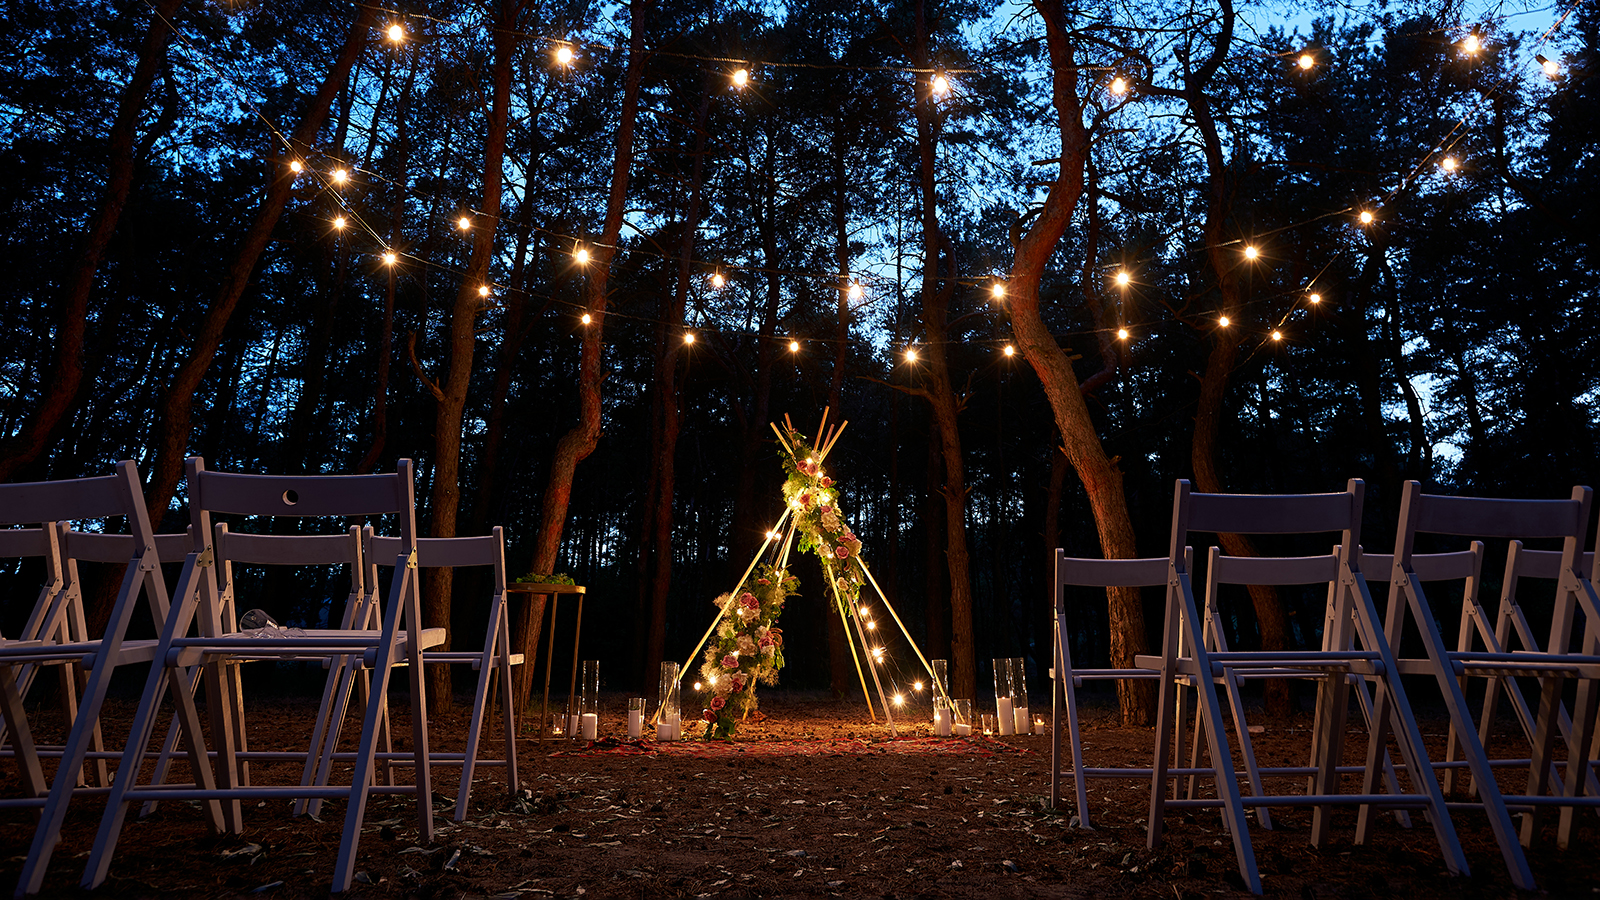 Festive string lights illumination on boho tipi arch decor on outdoor wedding ceremony venue in pine forest at night. Vintage string lights bulb garlands shining above chairs at a summer rural wedding